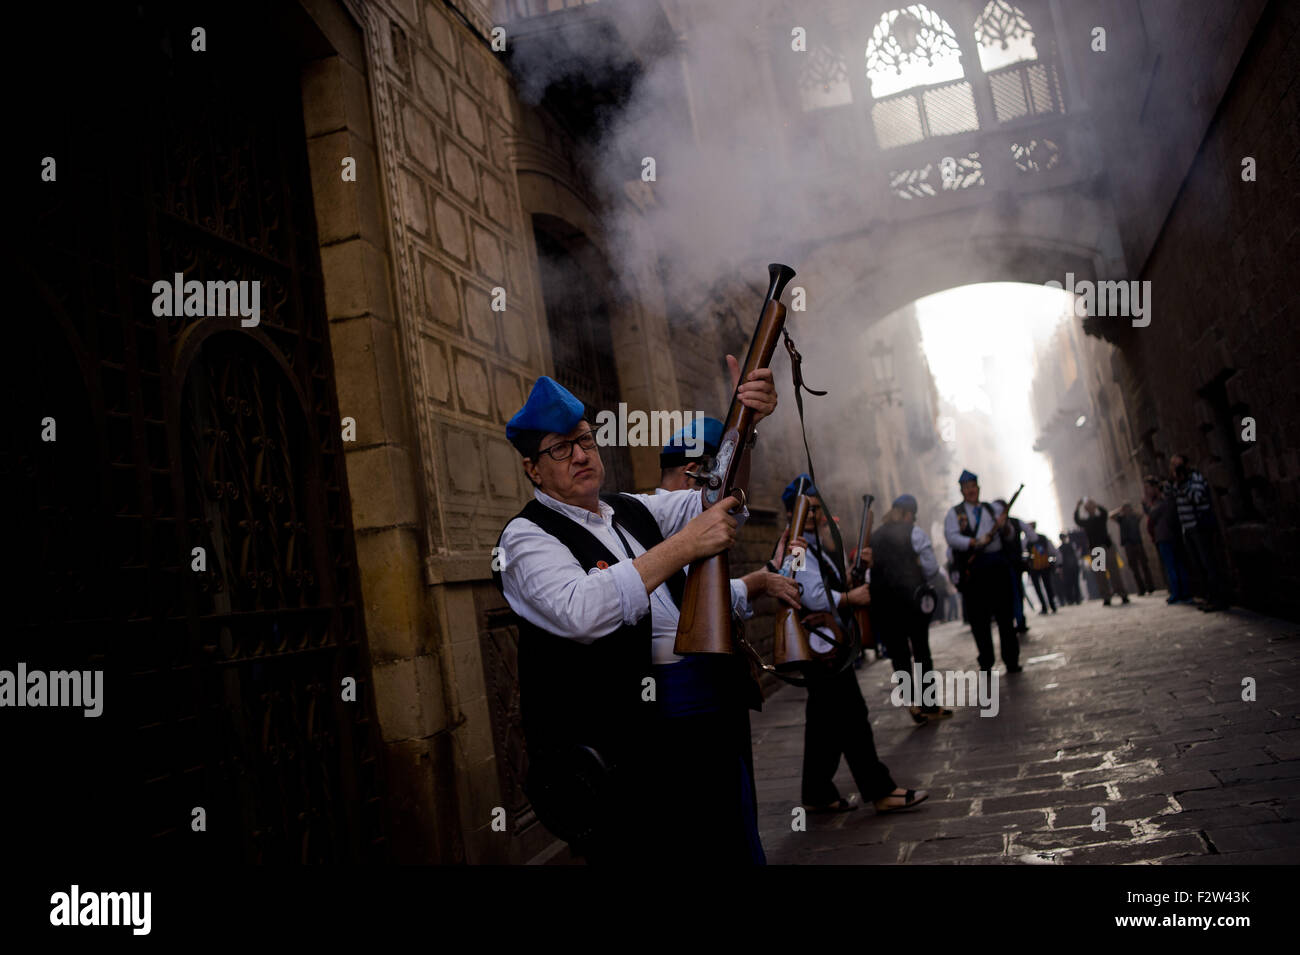 Barcelona, Spain. 24th September, 2015. Trabucaires  shoot his blunderbuss through the streets of Barcelona on the occasion of the celebrations of the Merce Festival (Festes de la Merce) on 24 September 2015, Spain. The Galejada Trabucaire marks the beginning of the day of the patron saint of Barcelona, La Merce. Men and women dressed as ancient Catalan bandits take to the streets of the old part of Barcelona and cause a loud noise with his blunderbusses full of gunpowder. Credit:   Jordi Boixareu/Alamy Live News Stock Photo